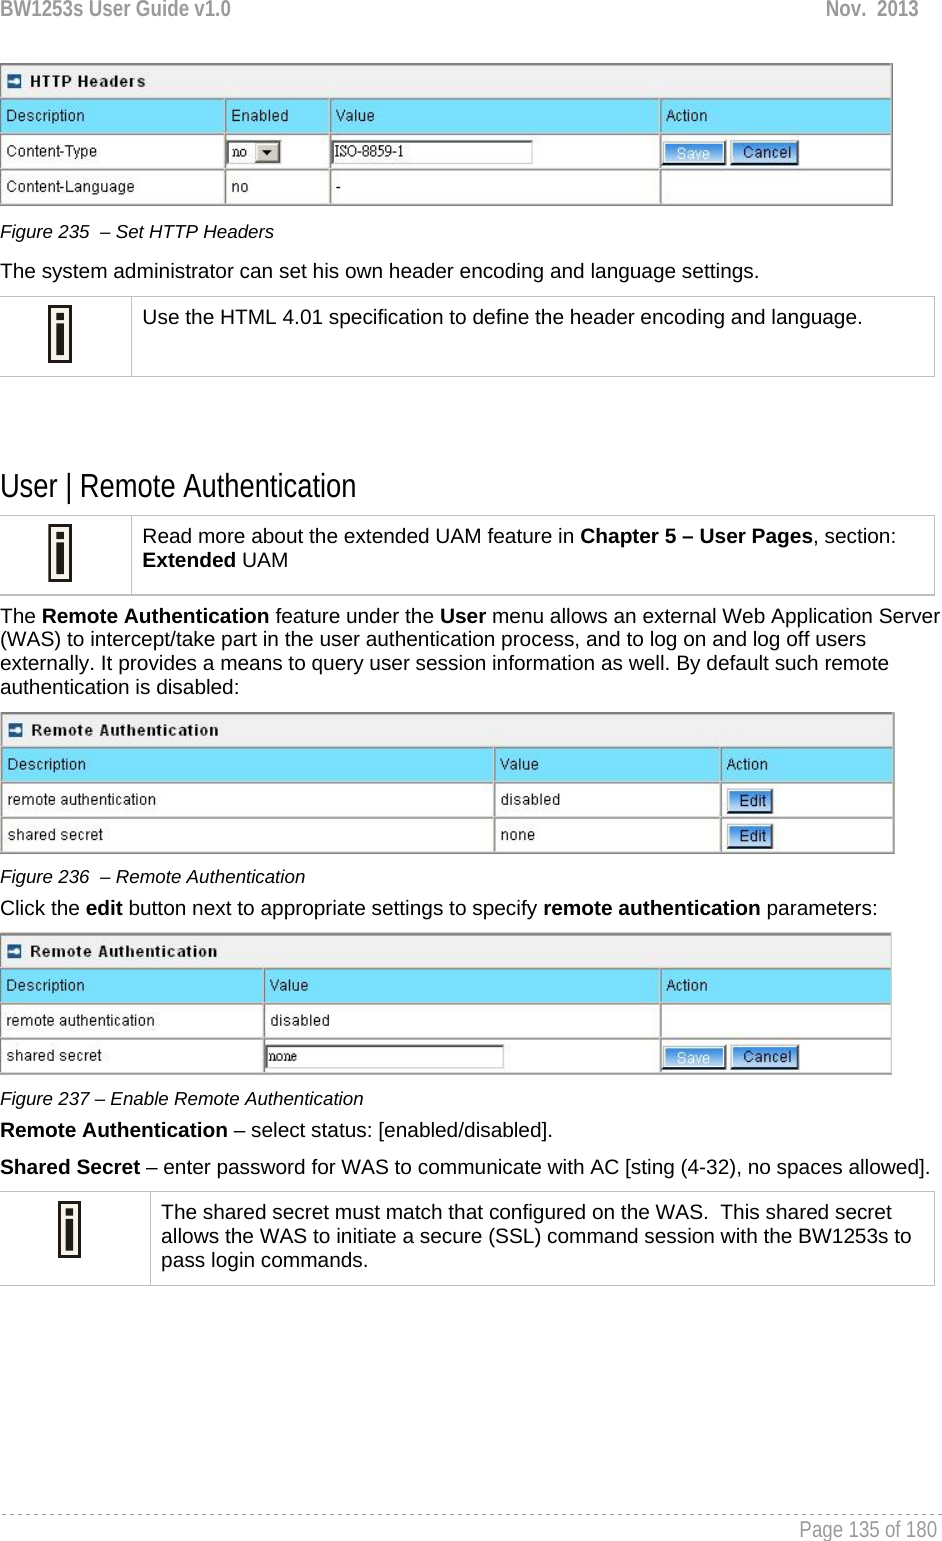 BW1253s User Guide v1.0  Nov.  2013     Page 135 of 180    Figure 235  – Set HTTP Headers  The system administrator can set his own header encoding and language settings.  Use the HTML 4.01 specification to define the header encoding and language.   User | Remote Authentication   Read more about the extended UAM feature in Chapter 5 – User Pages, section: Extended UAM The Remote Authentication feature under the User menu allows an external Web Application Server (WAS) to intercept/take part in the user authentication process, and to log on and log off users externally. It provides a means to query user session information as well. By default such remote authentication is disabled:  Figure 236  – Remote Authentication Click the edit button next to appropriate settings to specify remote authentication parameters:  Figure 237 – Enable Remote Authentication Remote Authentication – select status: [enabled/disabled]. Shared Secret – enter password for WAS to communicate with AC [sting (4-32), no spaces allowed].  The shared secret must match that configured on the WAS.  This shared secret allows the WAS to initiate a secure (SSL) command session with the BW1253s to pass login commands.    